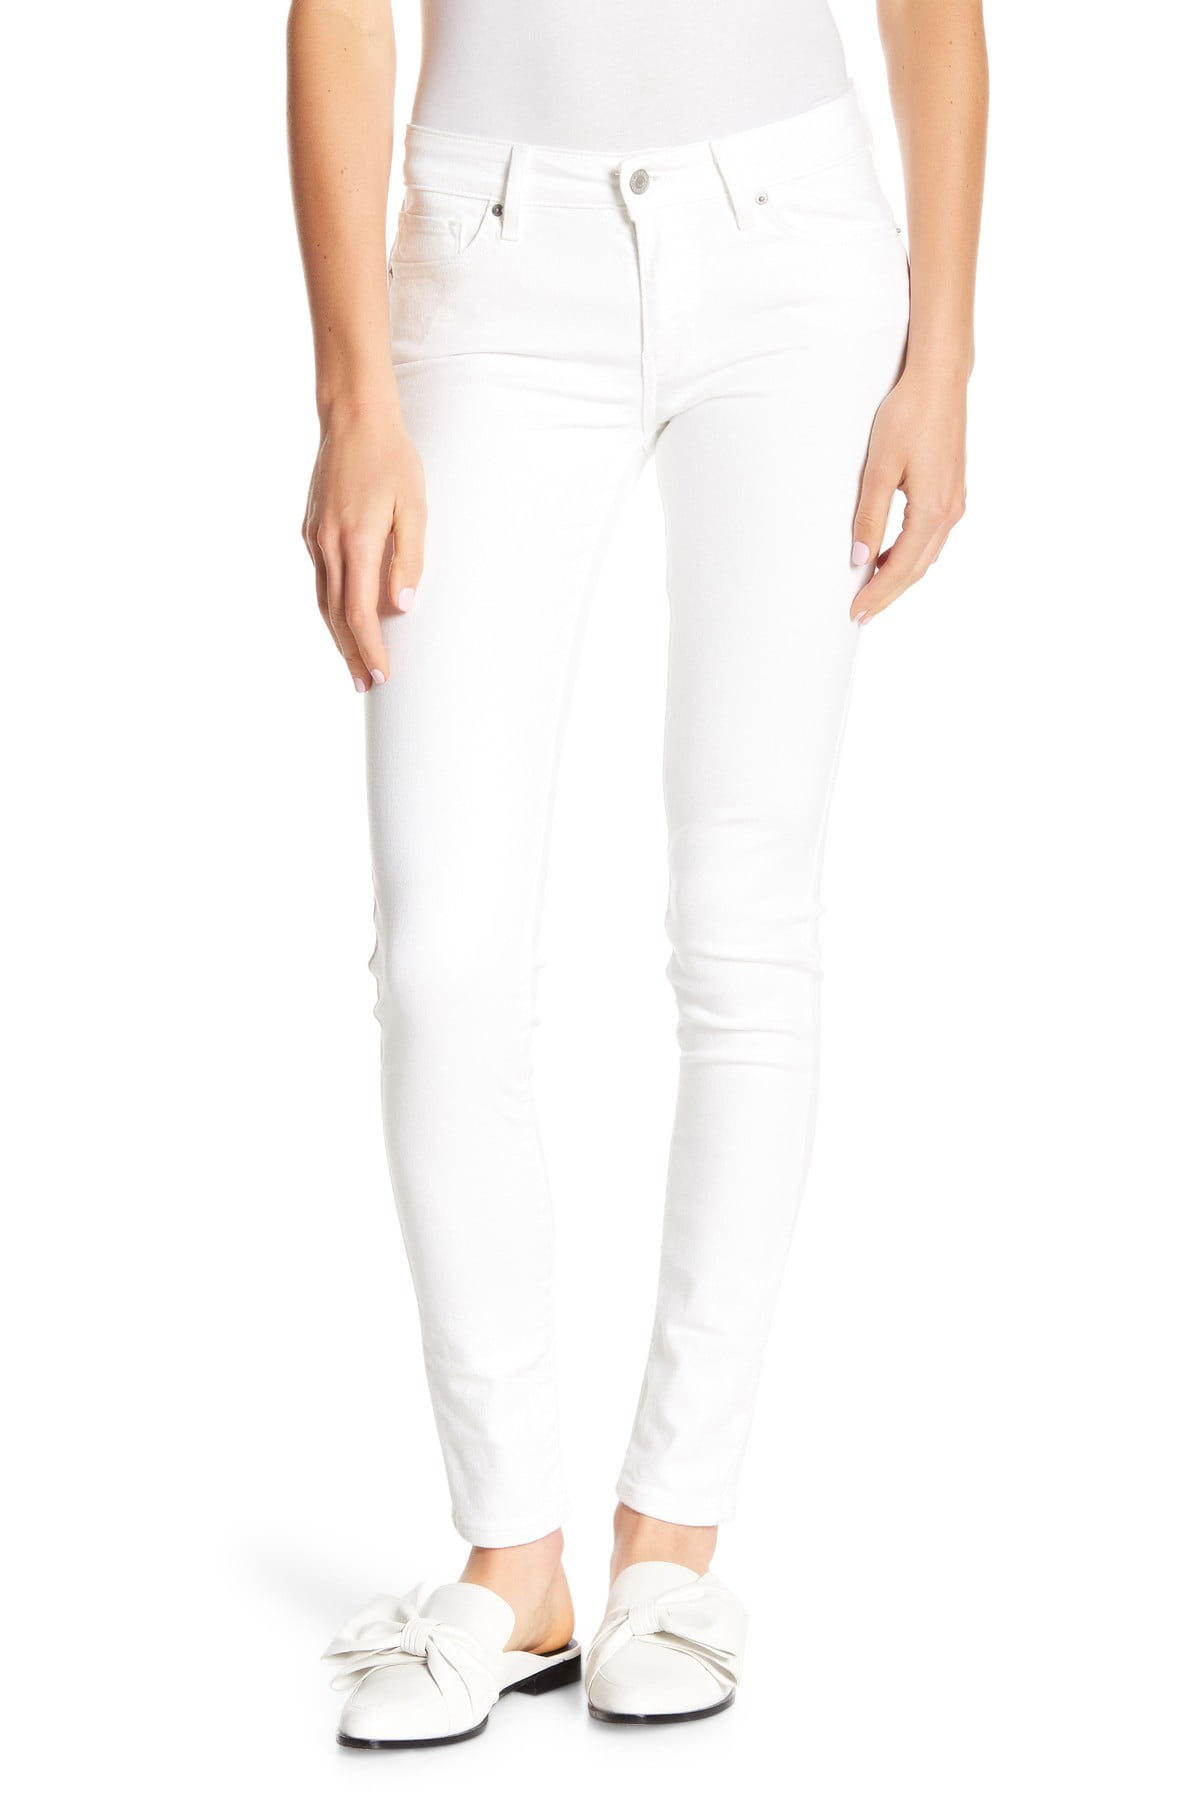 Girls 711 Skinny Fit Jeans, White, Size 